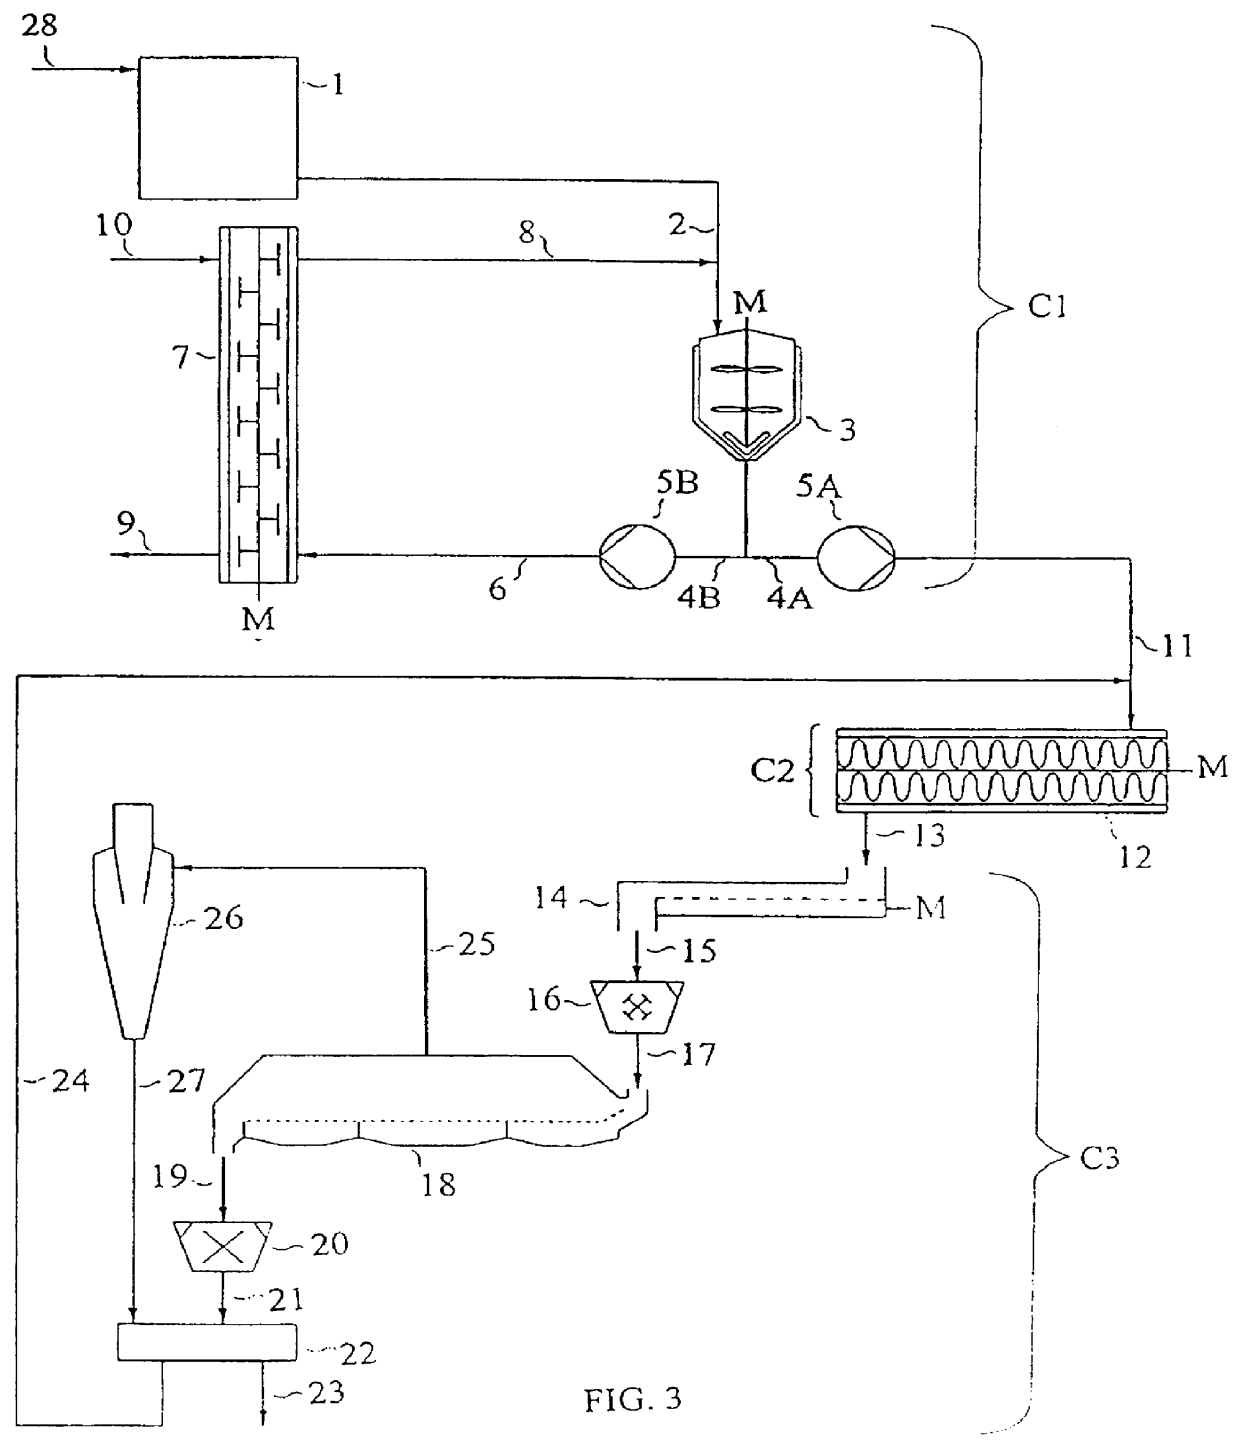 Process and apparatus for converting liquid whey into powder